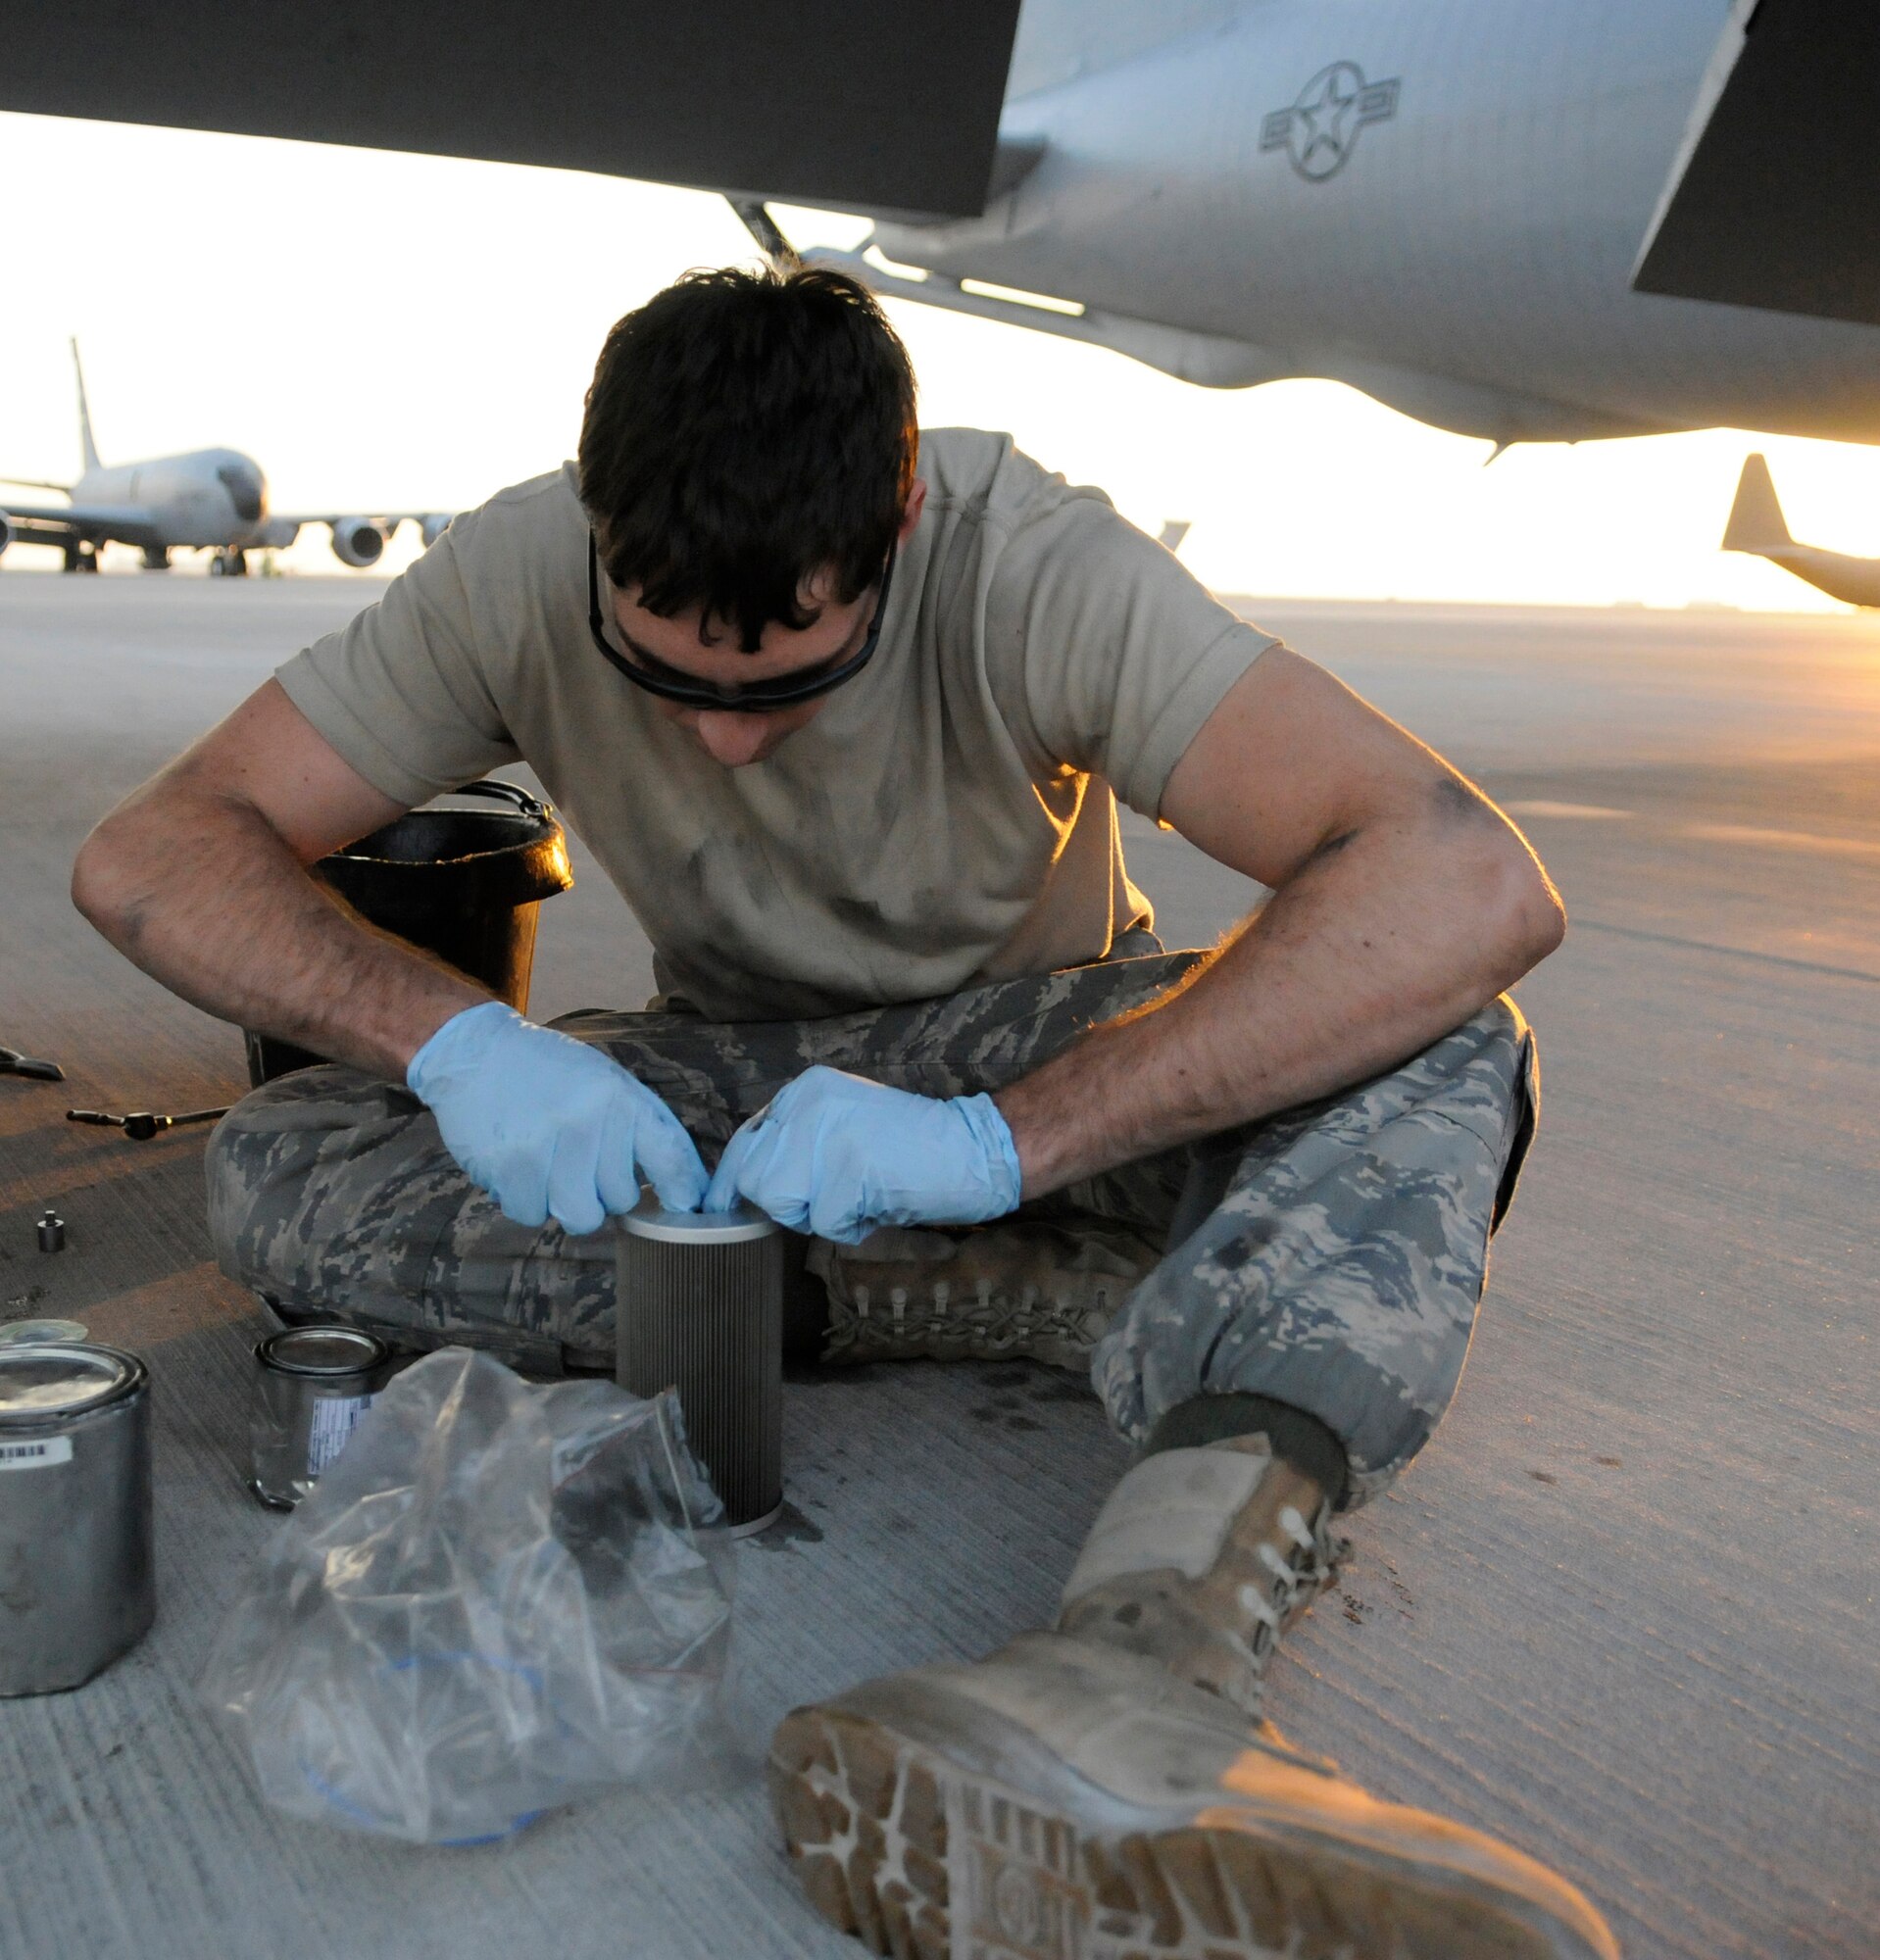 Airman 1st Class Alexander Lesch, 379th Expeditionary Aircraft Maintenance Squadron, works a new seal into place on a fuel filter during a 120-hour inspection on a KC-135 Stratotanker engine, Nov. 20, at an undisclosed air base in Southwest Asia.   The KC-135 Stratotanker provides the core aerial refueling capability for the United States Air Force and also provides aerial refueling support to Navy, Marine Corps and allied nation aircraft in the Central Command area of responsibility.  Airman Lesch is a native of Burlington, Wis., and is deployed from Grand Forks Air Force Base, N.D., in support of Operations Iraqi and Enduring Freedom and Joint Task Force-Horn of Africa.  (U.S. Air Force photo by Tech. Sgt. Michael Boquette/Released)